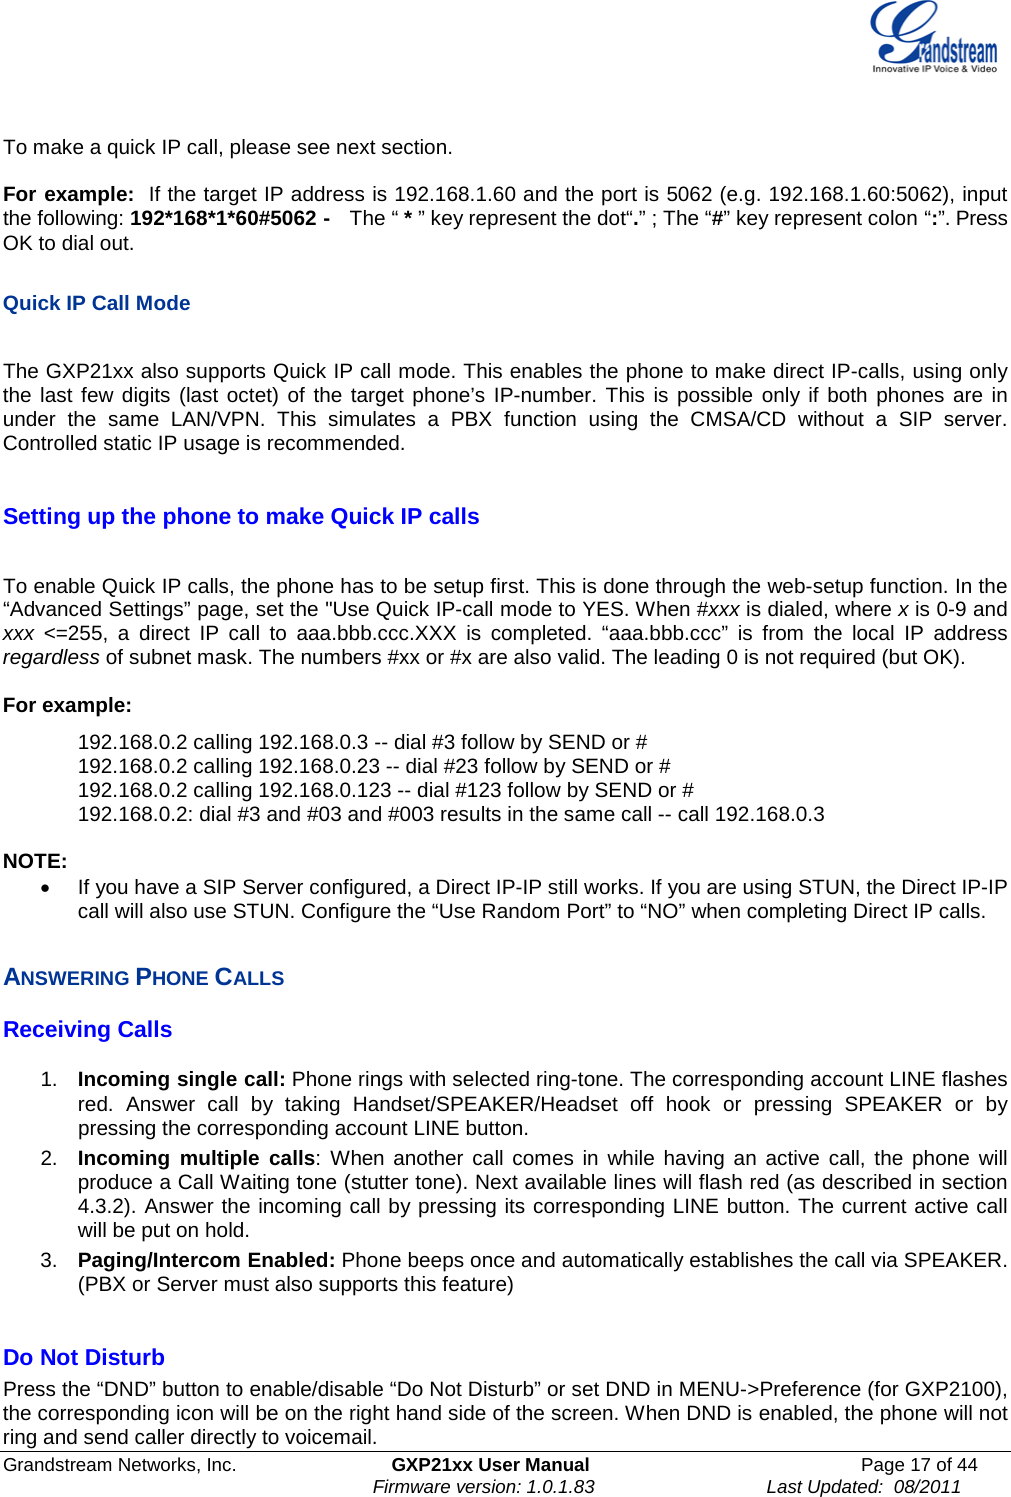  Grandstream Networks, Inc. GXP21xx User Manual Page 17 of 44                                                               Firmware version: 1.0.1.83                                 Last Updated:  08/2011   To make a quick IP call, please see next section.  For example:  If the target IP address is 192.168.1.60 and the port is 5062 (e.g. 192.168.1.60:5062), input the following: 192*168*1*60#5062 -   The “ * ” key represent the dot“.” ; The “#” key represent colon “:”. Press OK to dial out.  Quick IP Call Mode  The GXP21xx also supports Quick IP call mode. This enables the phone to make direct IP-calls, using only the last few digits (last octet) of the target phone’s IP-number. This is possible only if both phones are in under the same LAN/VPN. This simulates a PBX function using the CMSA/CD without a SIP server. Controlled static IP usage is recommended.   Setting up the phone to make Quick IP calls  To enable Quick IP calls, the phone has to be setup first. This is done through the web-setup function. In the “Advanced Settings” page, set the &quot;Use Quick IP-call mode to YES. When #xxx is dialed, where x is 0-9 and xxx &lt;=255, a direct IP call to aaa.bbb.ccc.XXX is completed. “aaa.bbb.ccc” is from the local IP address regardless of subnet mask. The numbers #xx or #x are also valid. The leading 0 is not required (but OK).  For example:   192.168.0.2 calling 192.168.0.3 -- dial #3 follow by SEND or # 192.168.0.2 calling 192.168.0.23 -- dial #23 follow by SEND or # 192.168.0.2 calling 192.168.0.123 -- dial #123 follow by SEND or # 192.168.0.2: dial #3 and #03 and #003 results in the same call -- call 192.168.0.3  NOTE:   • If you have a SIP Server configured, a Direct IP-IP still works. If you are using STUN, the Direct IP-IP call will also use STUN. Configure the “Use Random Port” to “NO” when completing Direct IP calls.  ANSWERING PHONE CALLS Receiving Calls  1. Incoming single call: Phone rings with selected ring-tone. The corresponding account LINE flashes red.  Answer call by taking Handset/SPEAKER/Headset off hook or pressing SPEAKER or by pressing the corresponding account LINE button.   2. Incoming multiple calls:  When another call comes in while having an active call, the phone will produce a Call Waiting tone (stutter tone). Next available lines will flash red (as described in section 4.3.2). Answer the incoming call by pressing its corresponding LINE button. The current active call will be put on hold.  3. Paging/Intercom Enabled: Phone beeps once and automatically establishes the call via SPEAKER. (PBX or Server must also supports this feature)  Do Not Disturb Press the “DND” button to enable/disable “Do Not Disturb” or set DND in MENU-&gt;Preference (for GXP2100), the corresponding icon will be on the right hand side of the screen. When DND is enabled, the phone will not ring and send caller directly to voicemail.  